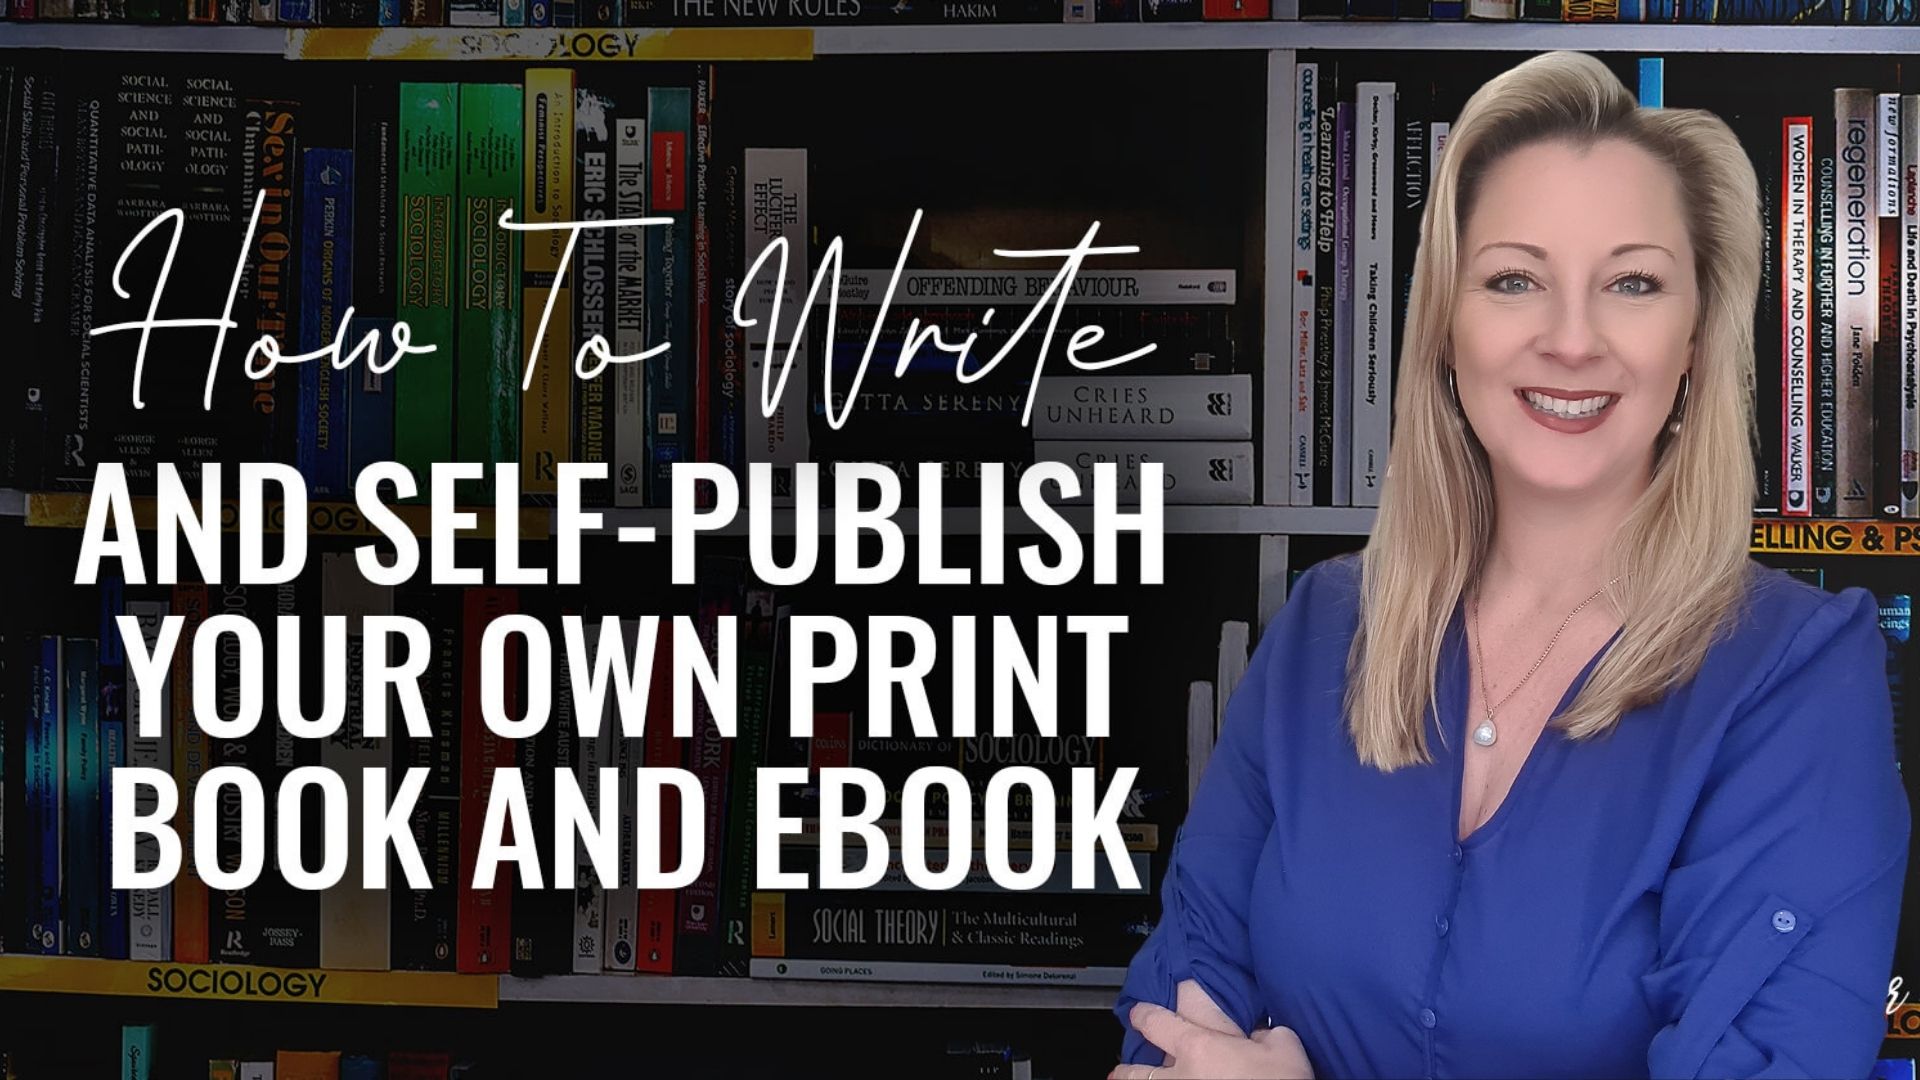 how to write and publish book on amazon sarah cordiner